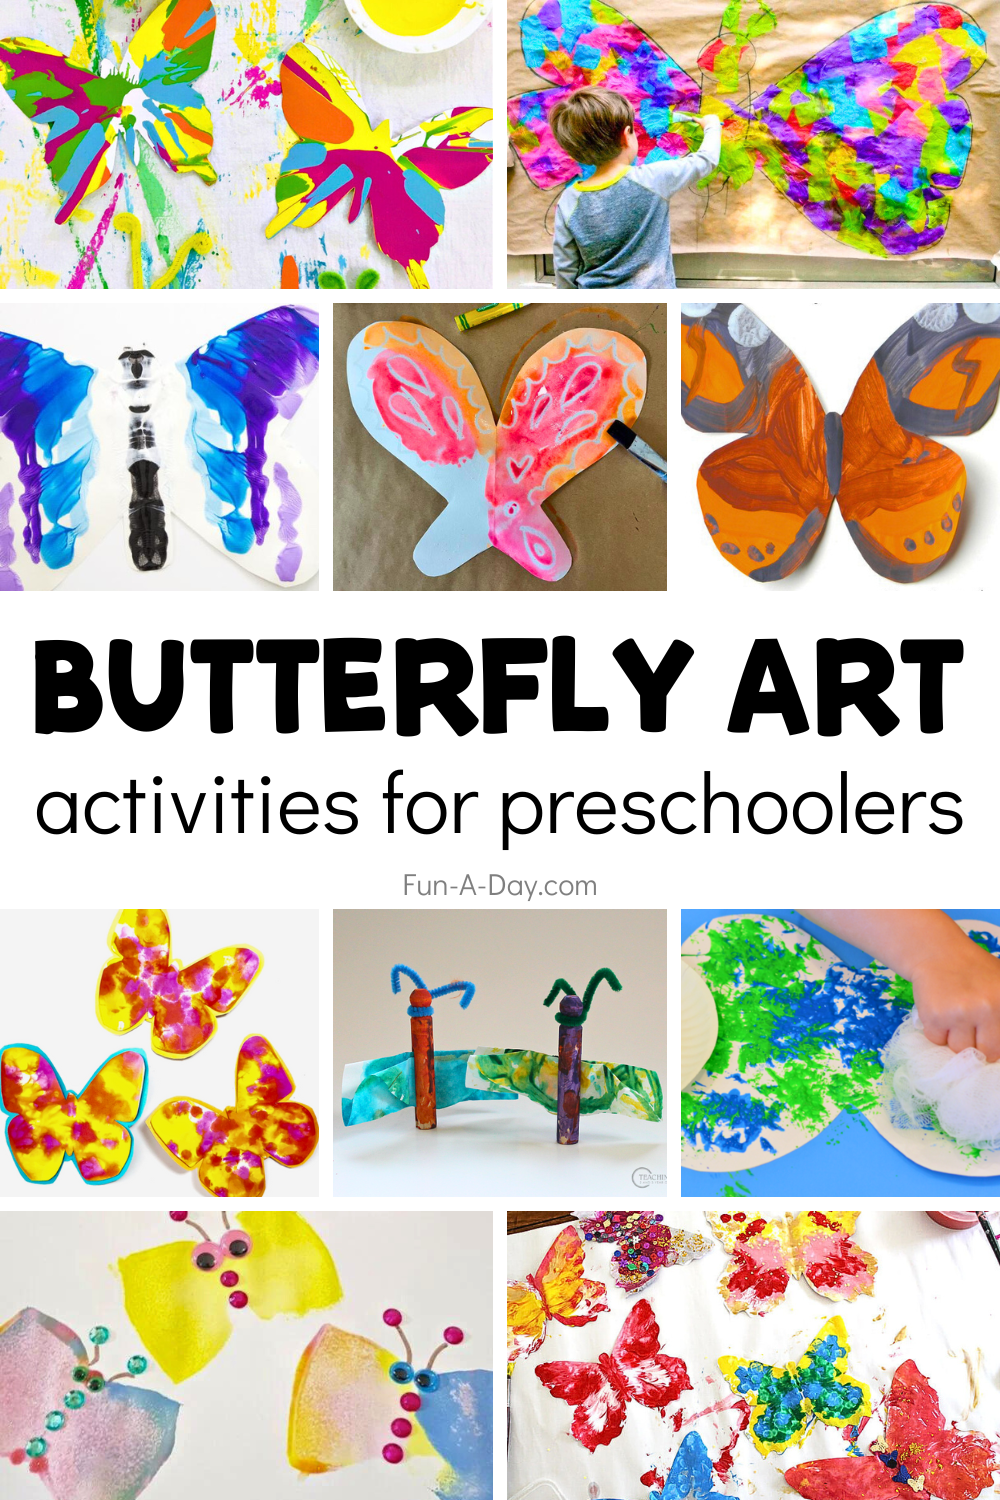 9 butterfly art ideas with text that reads butterfly art activities for preschoolers.